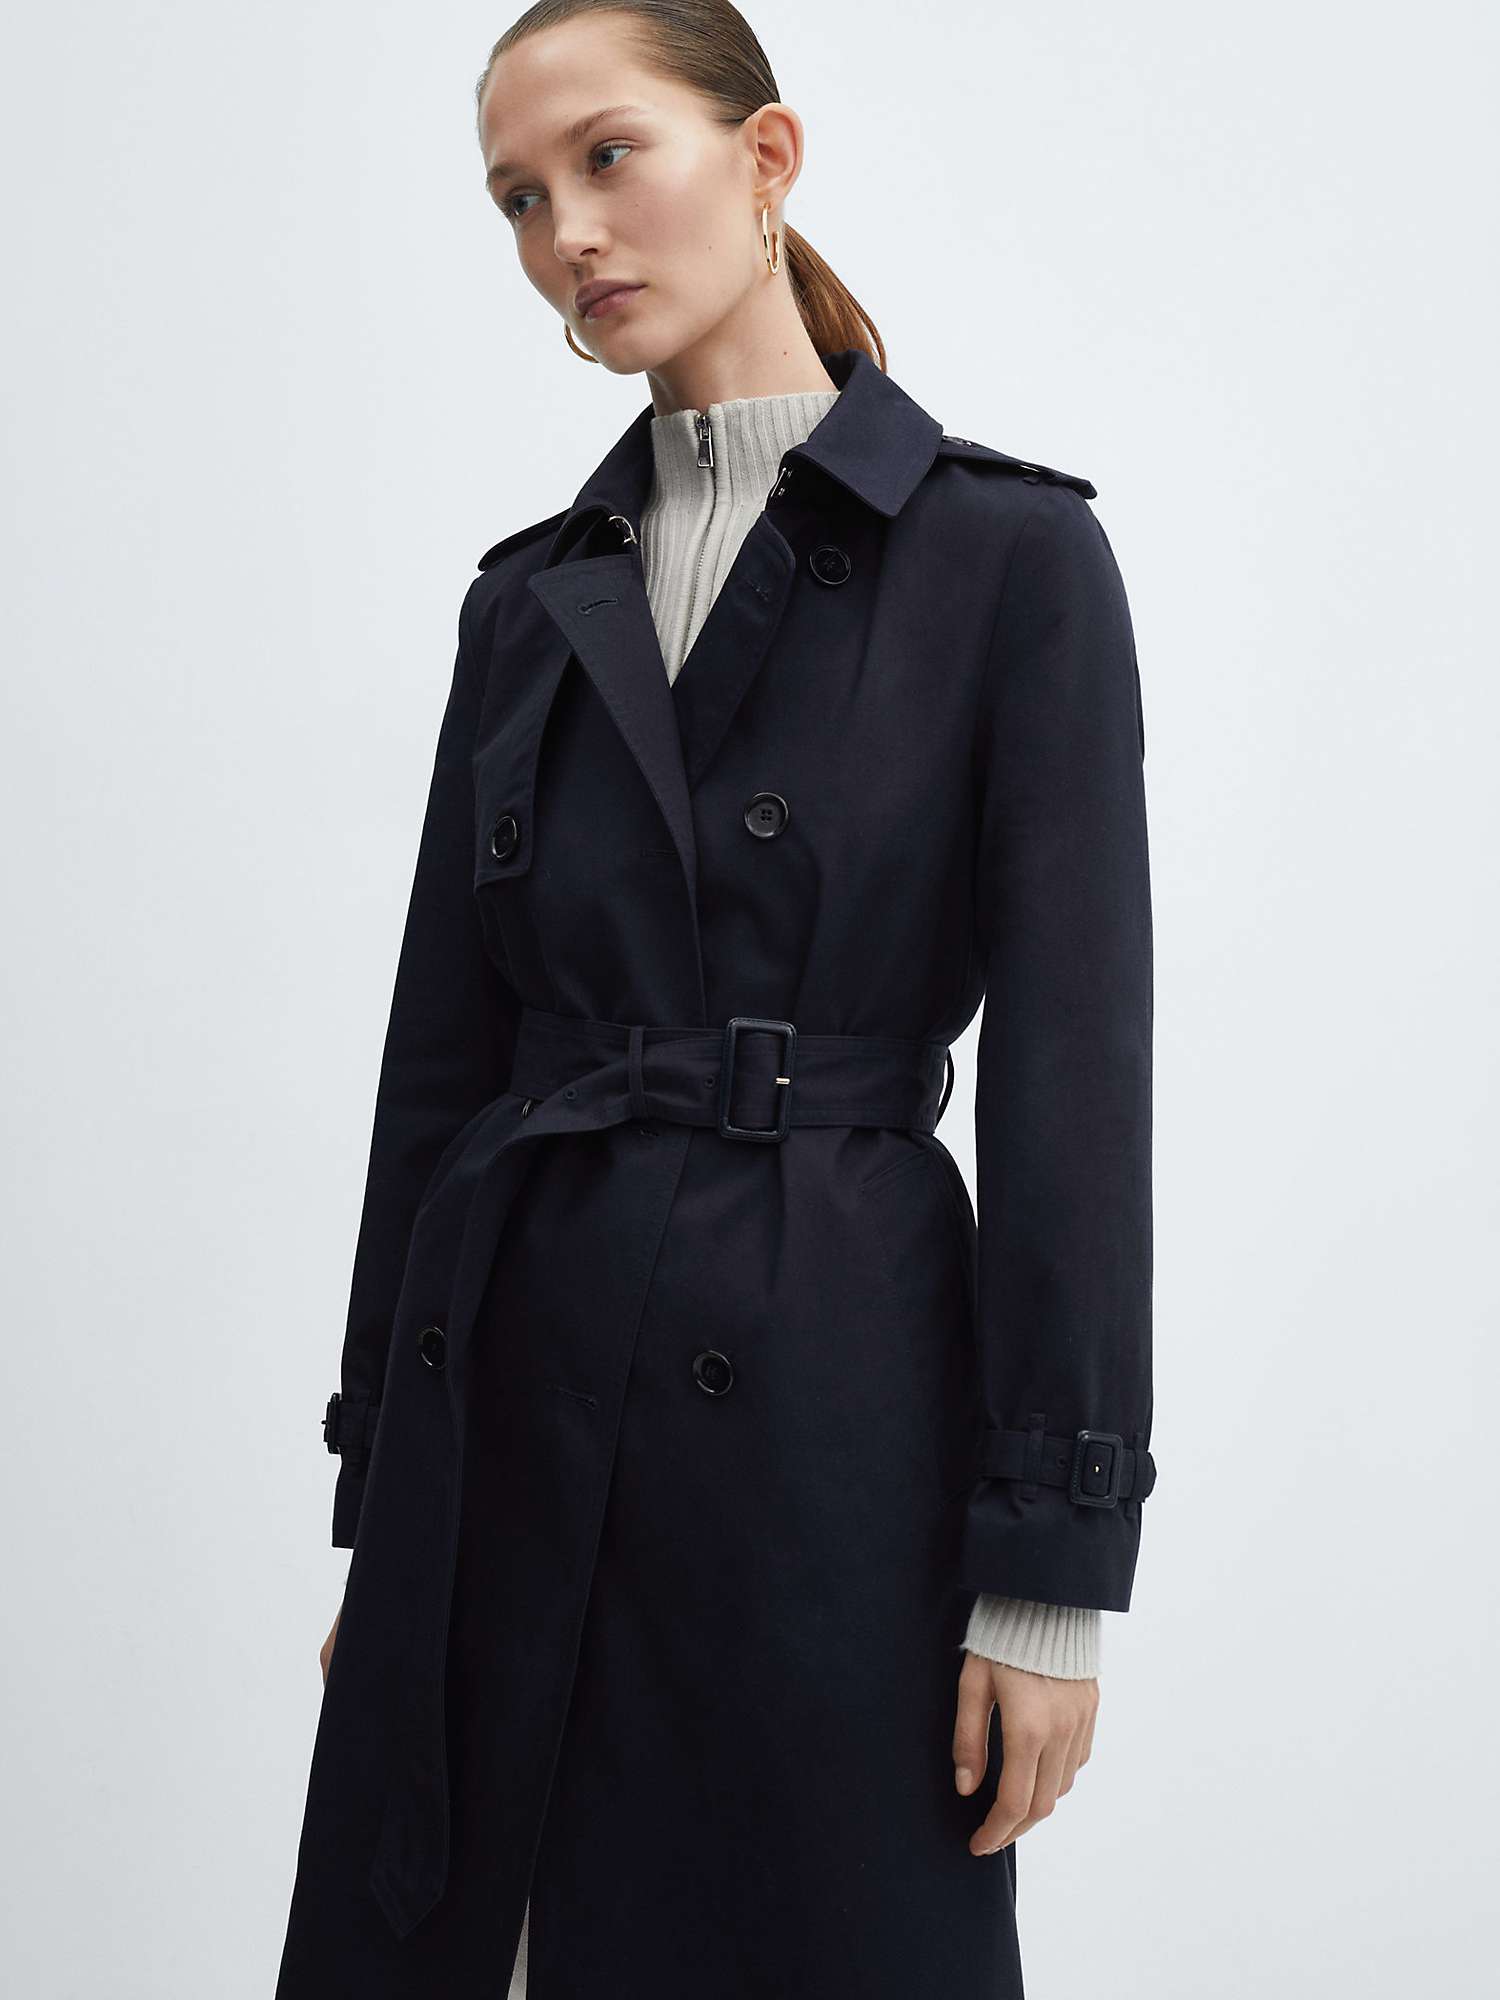 Buy Mango Polana Double Breasted Trench Coat Online at johnlewis.com